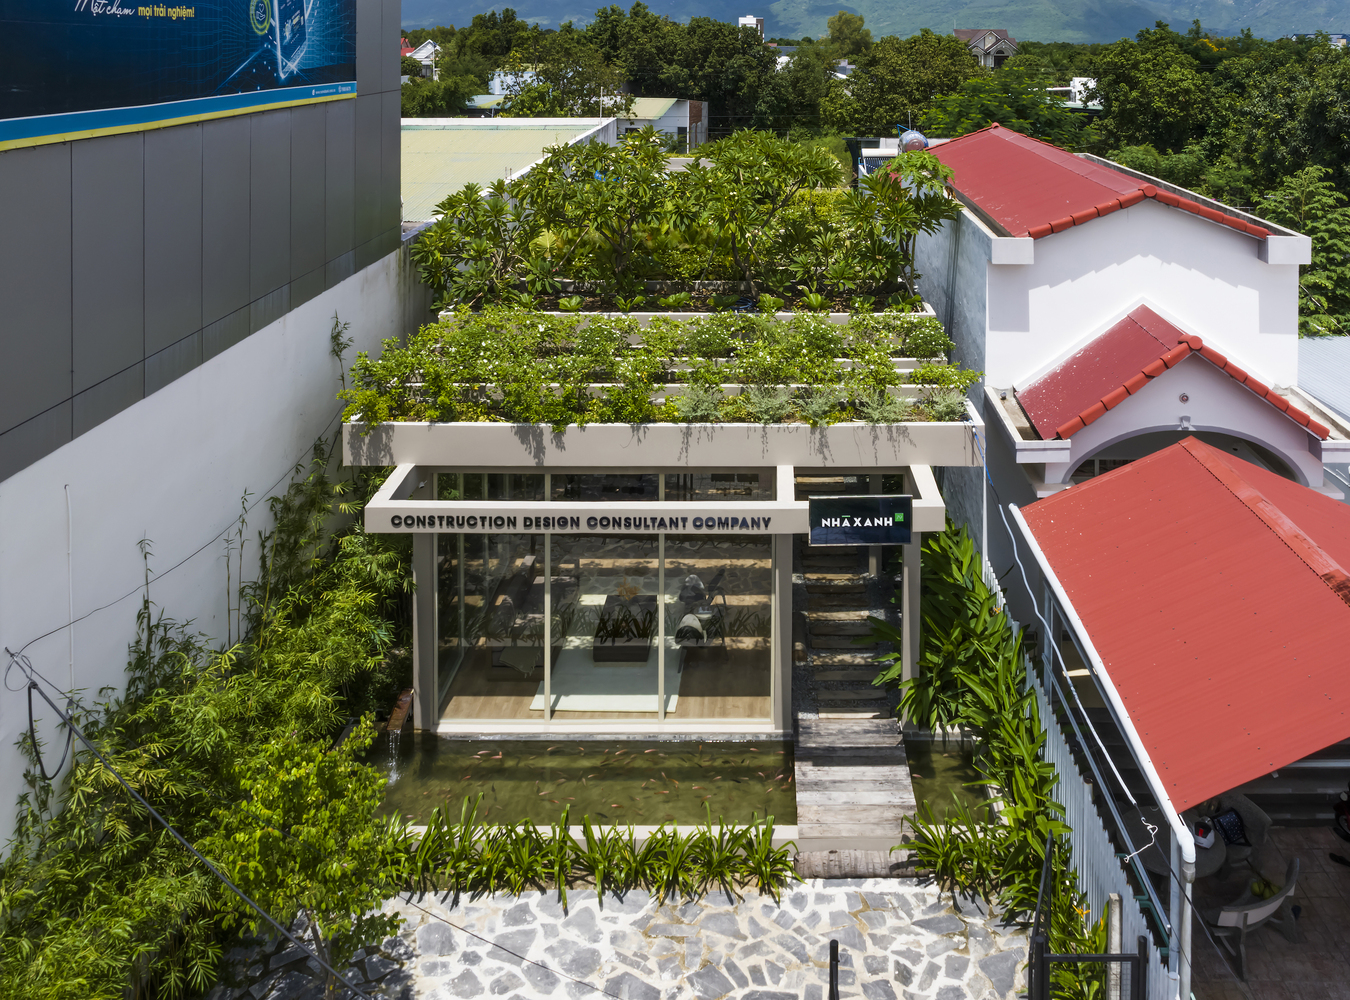 Office for Trees/Phạm Hữu Sơn Architects